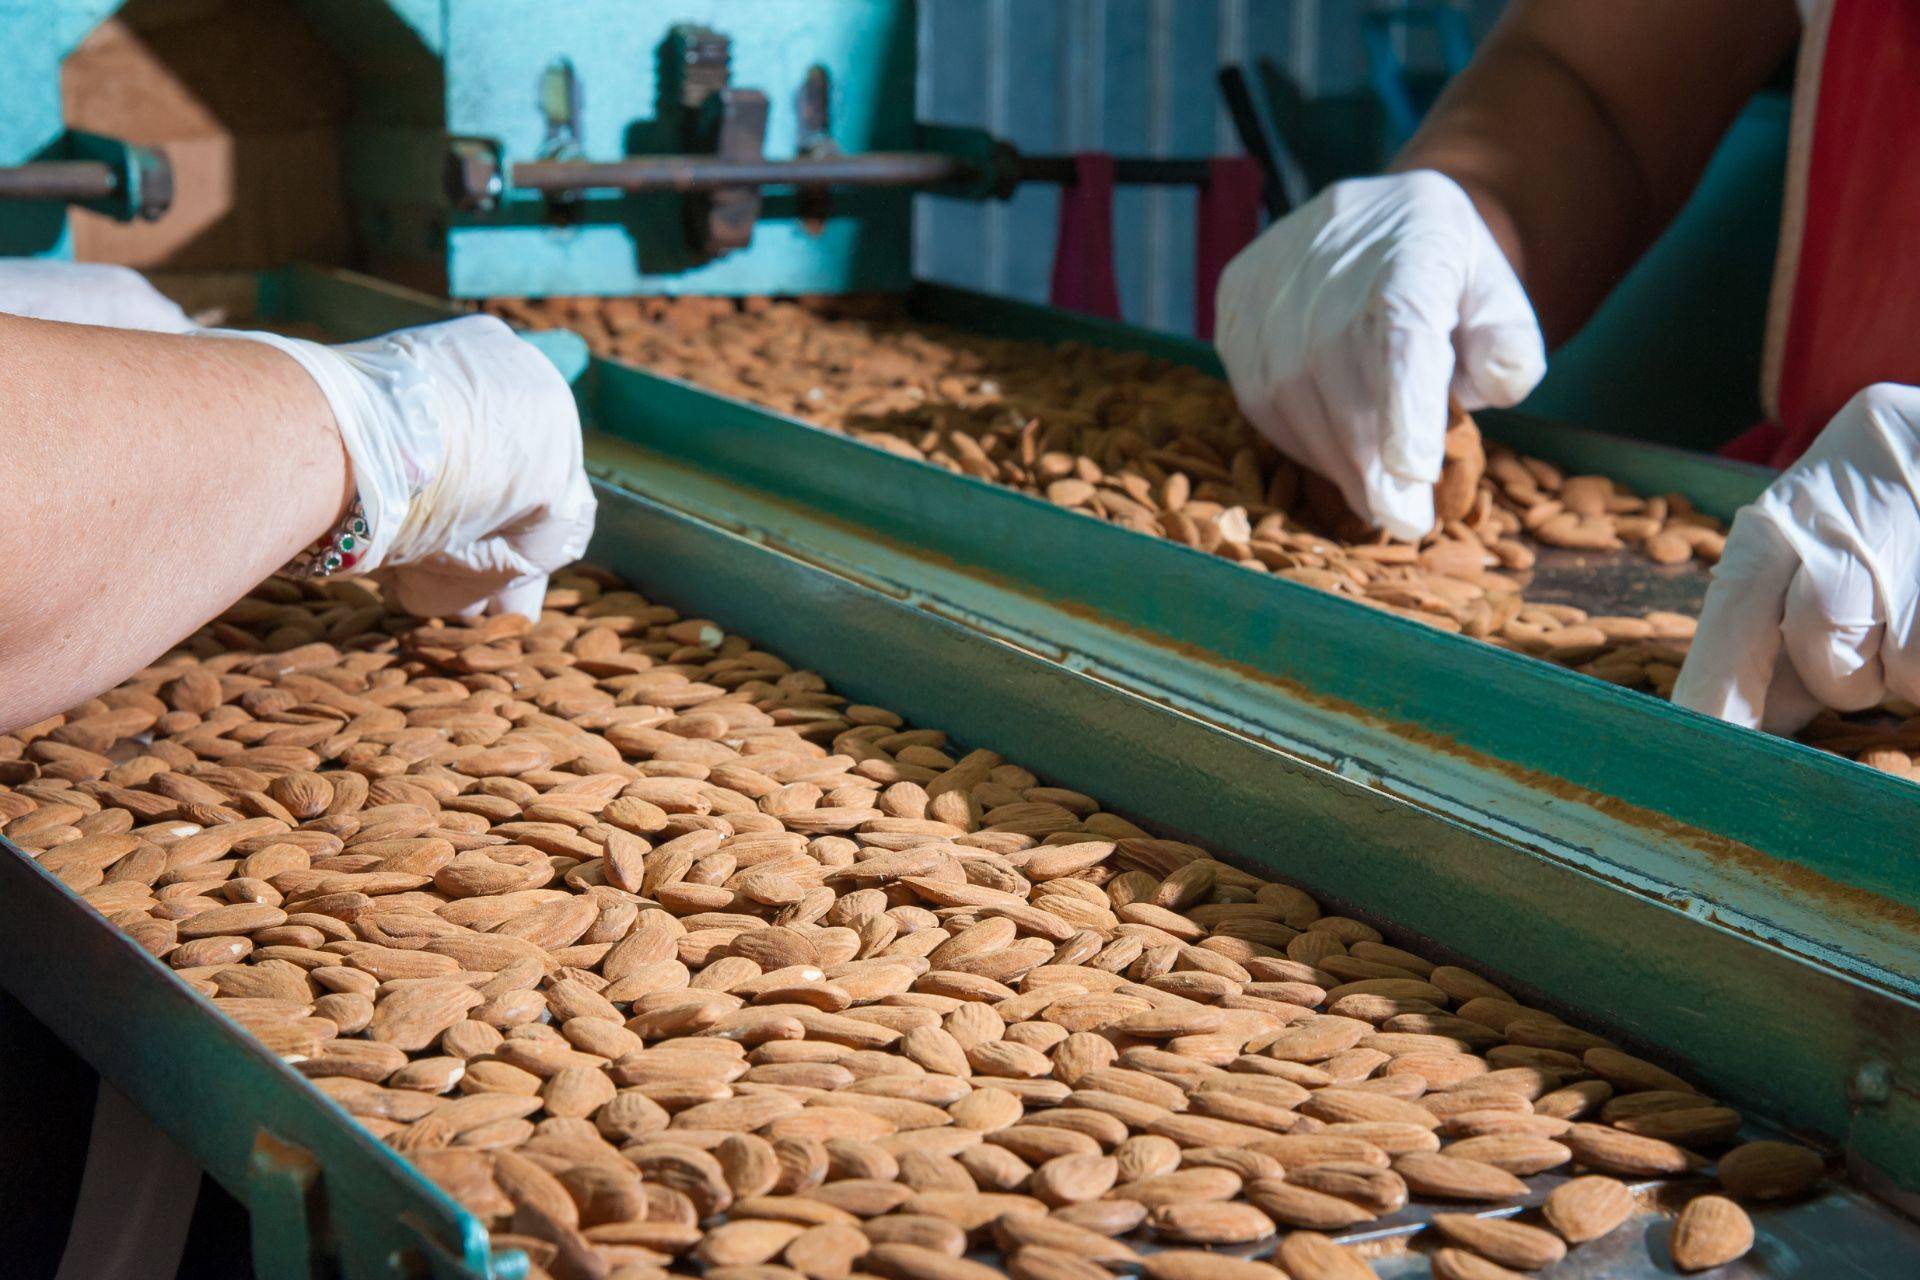 Sorting almond by hand on a conveyor belt